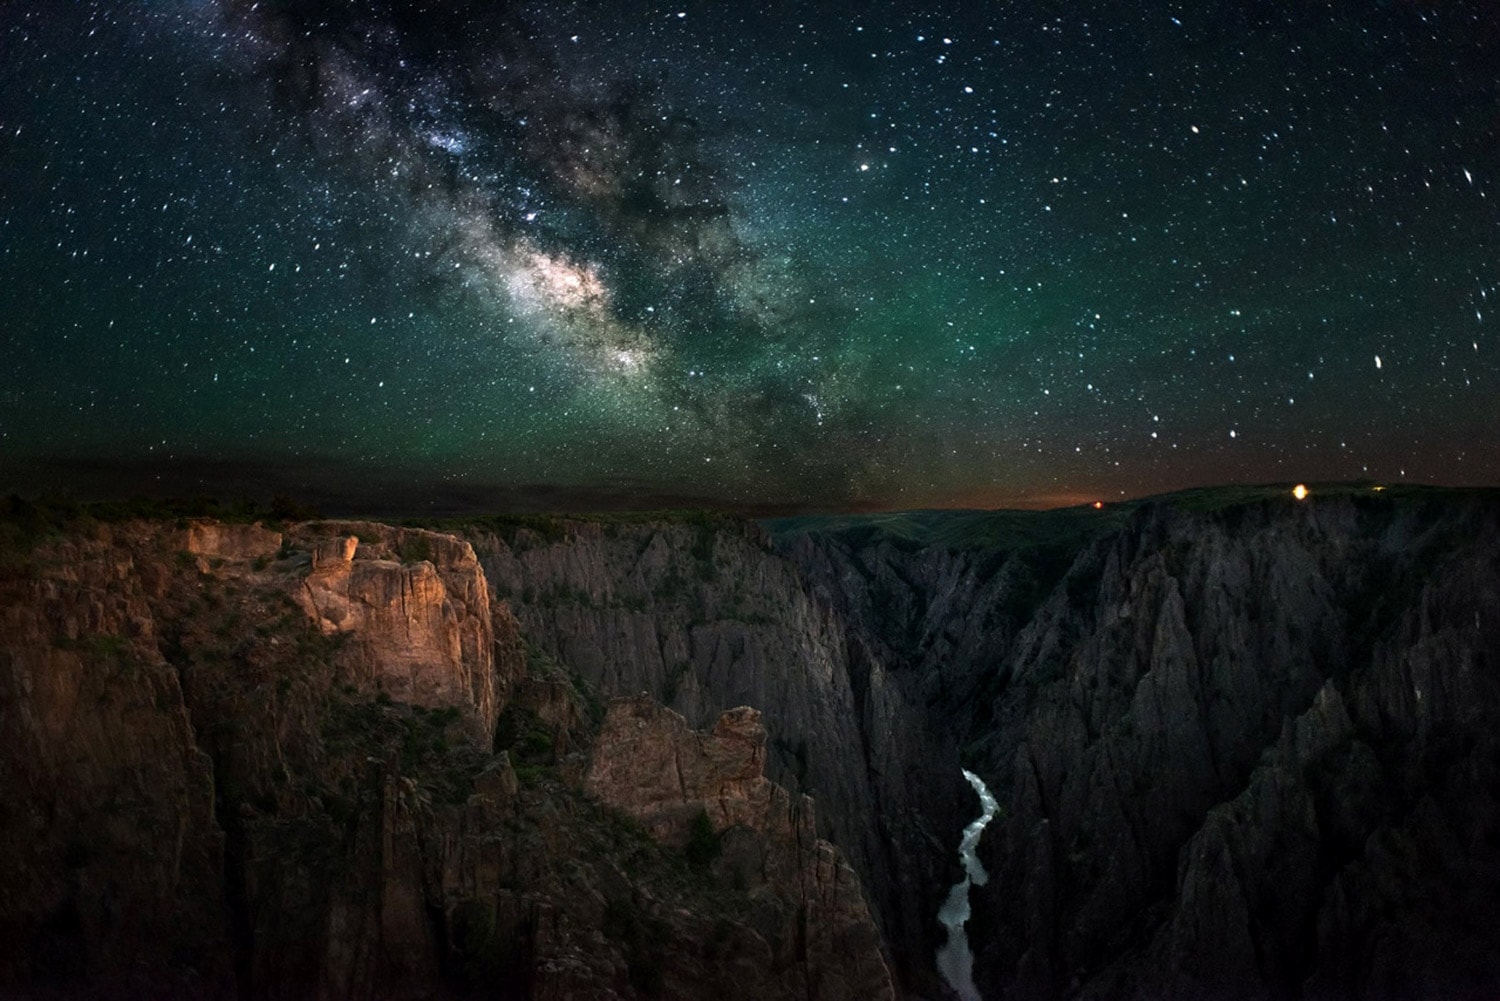 Milky Way in Black Canyon of the Gunnison National Park, Colorado - NPS G. Owens